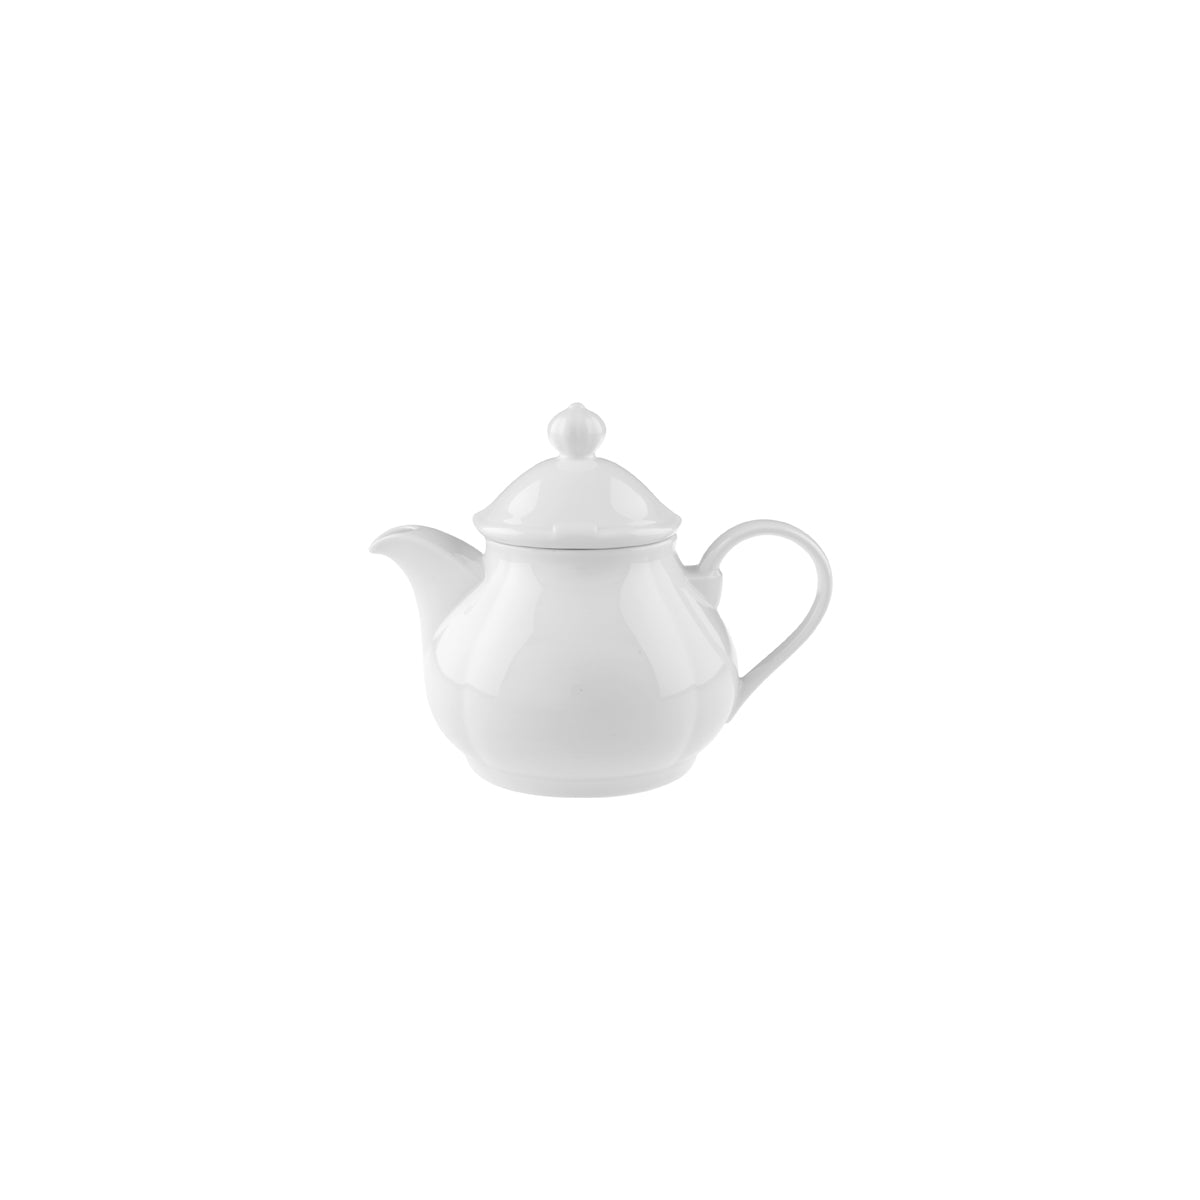 VB16-3318-0530 Villeroy And Boch Villeroy And Boch La Scala White Teapot No. 5 with Lid 400ml Tomkin Australia Hospitality Supplies